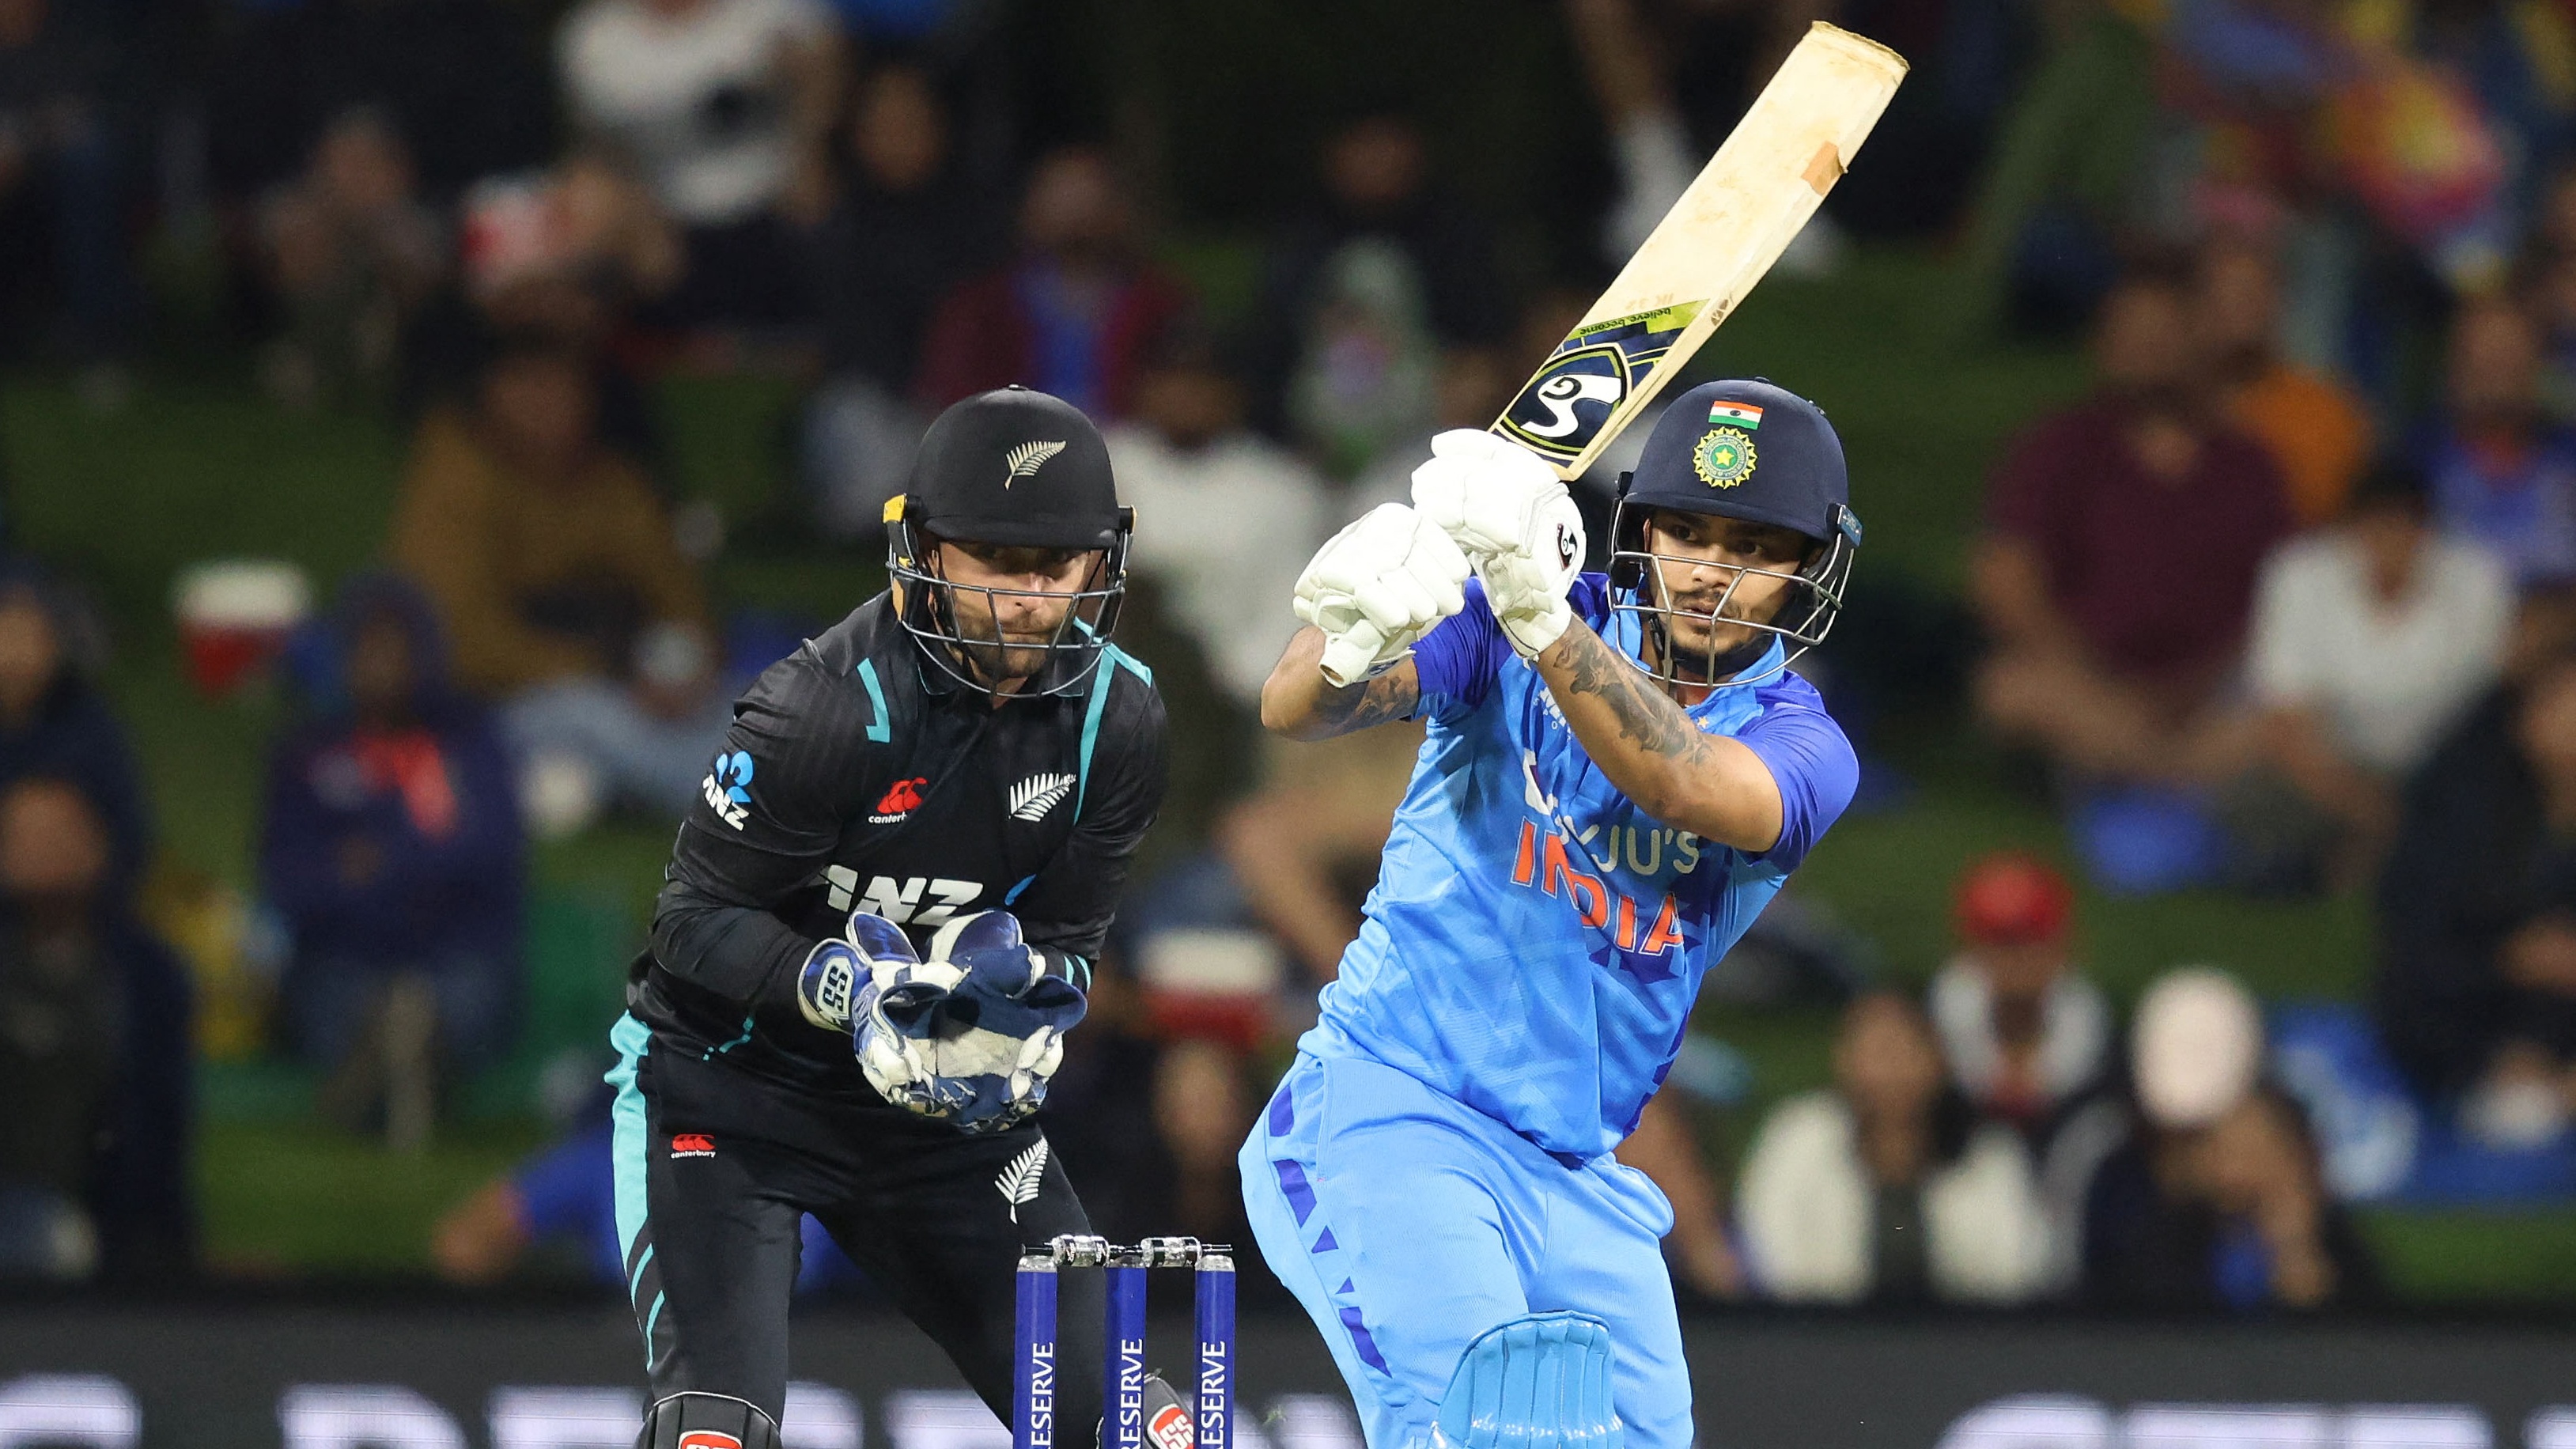 IND vs NZ live stream how to watch T20 series cricket online from anywhere TechRadar